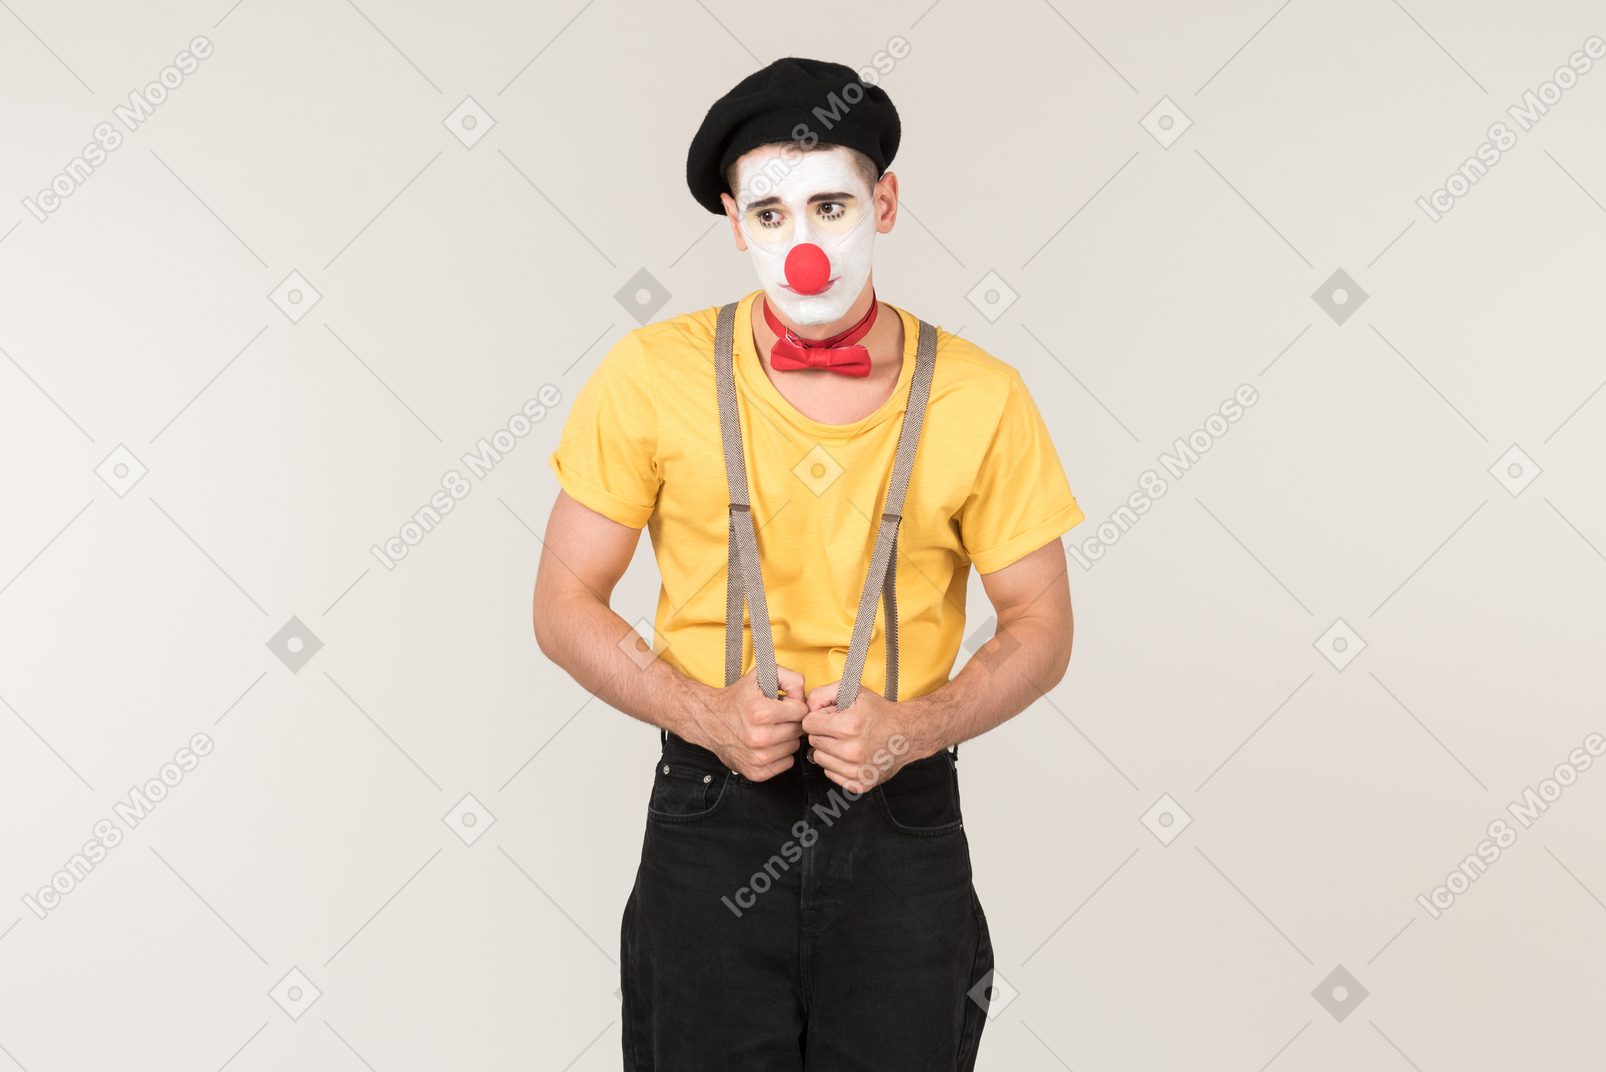 Offended looking male clown holding suspenders he's wearing